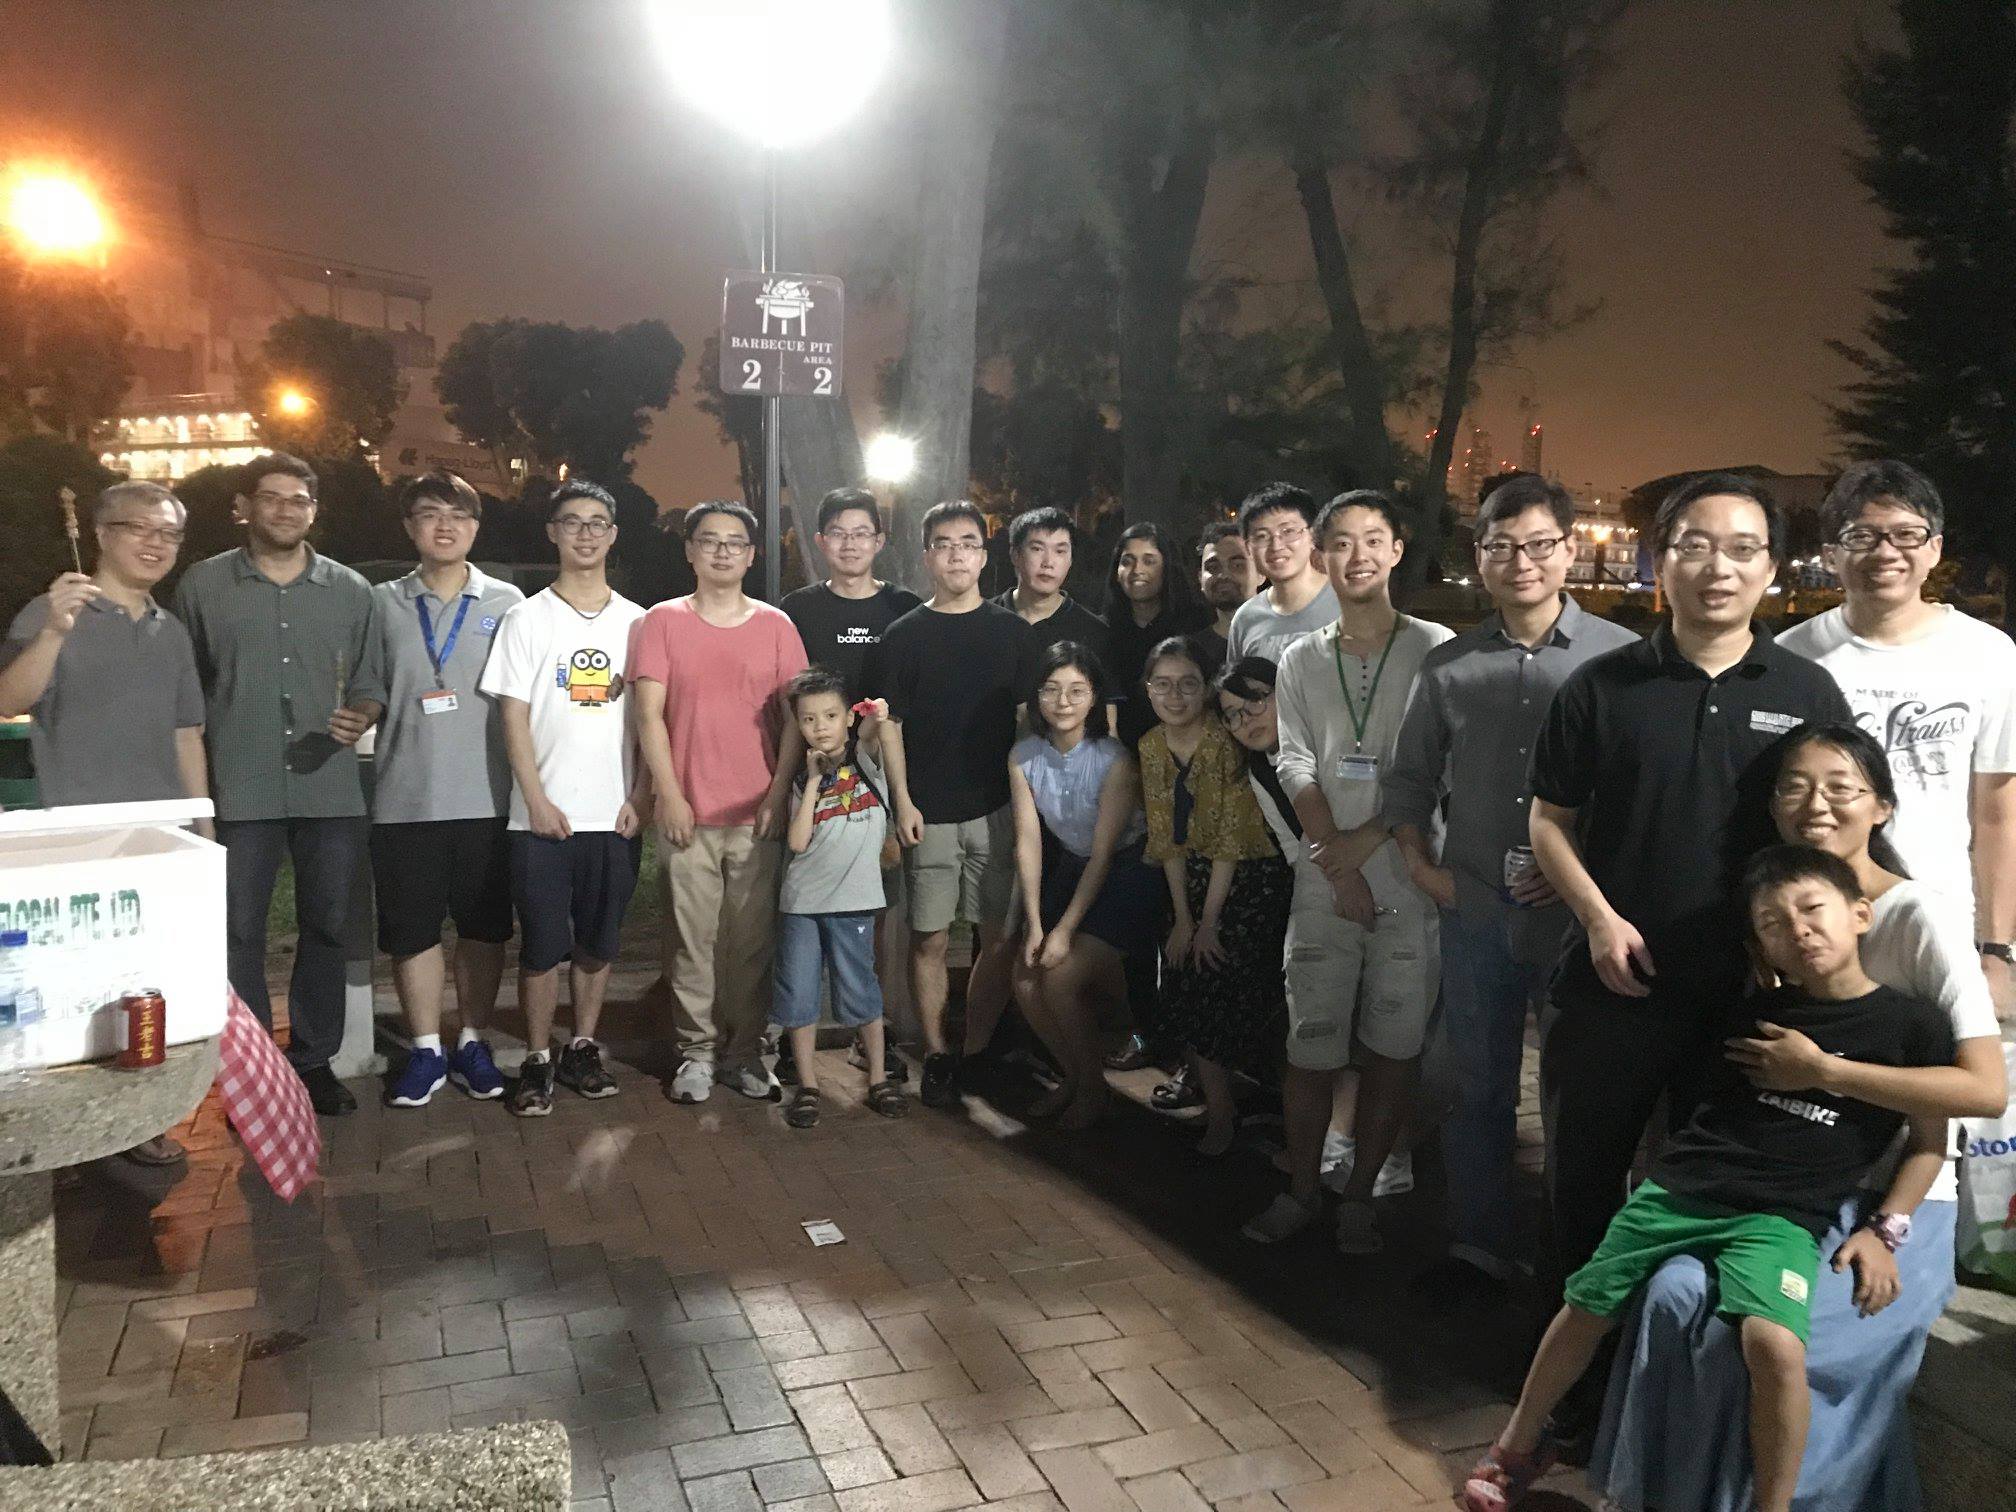 <b>Group Dinner: Barbecue at West Coat Park</b><br> Wing members, Alumni, Visiting students, Interns, Visting Professors, friends in Singapore